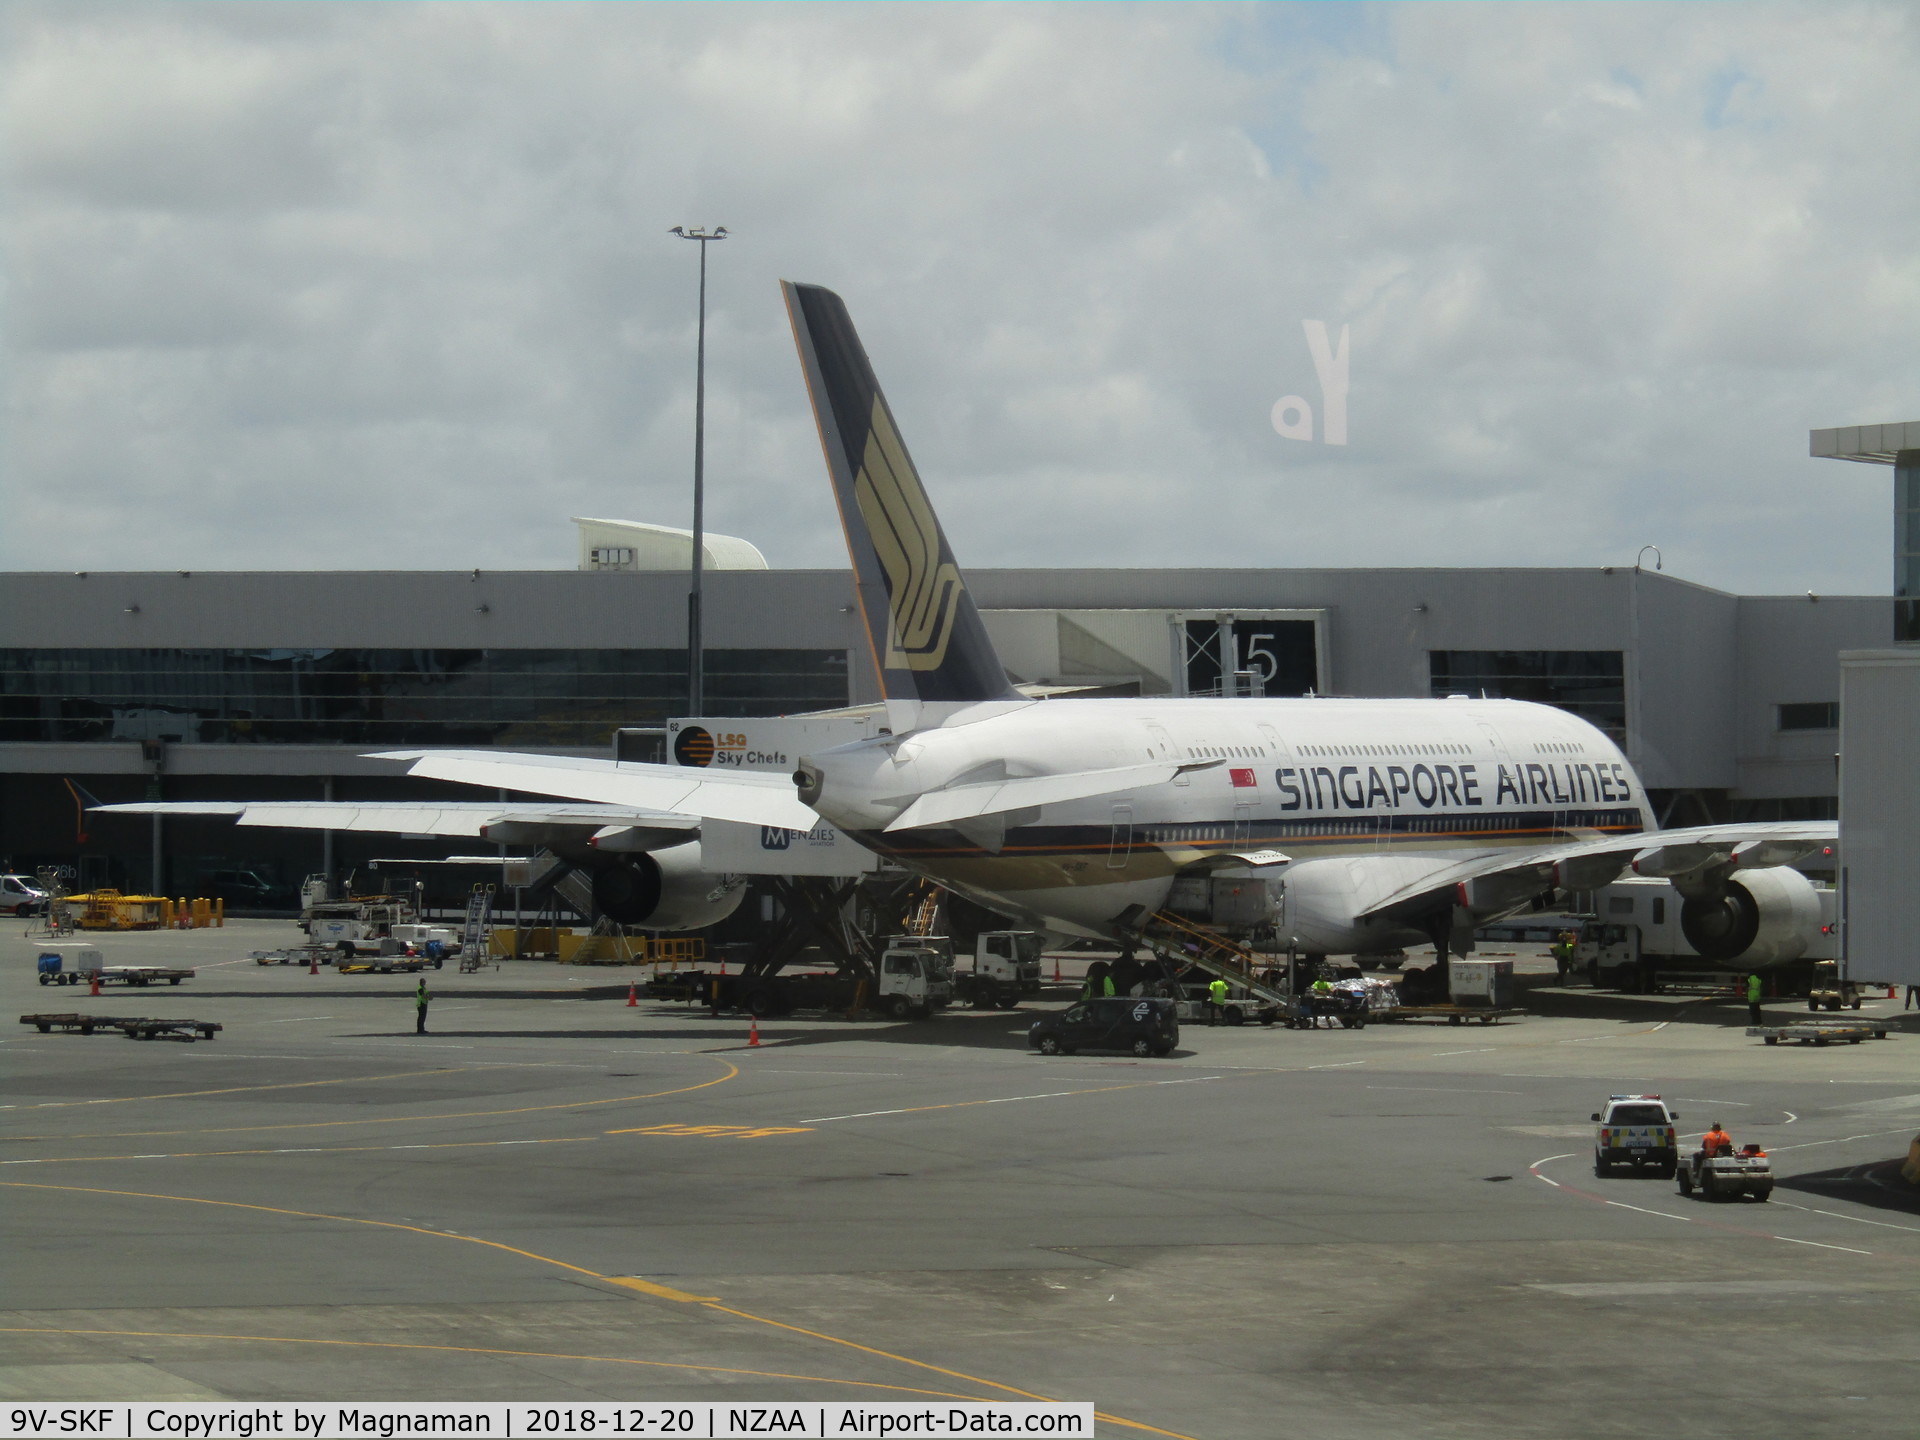 9V-SKF, 2008 Airbus A380-841 C/N 012, on stand at AKL